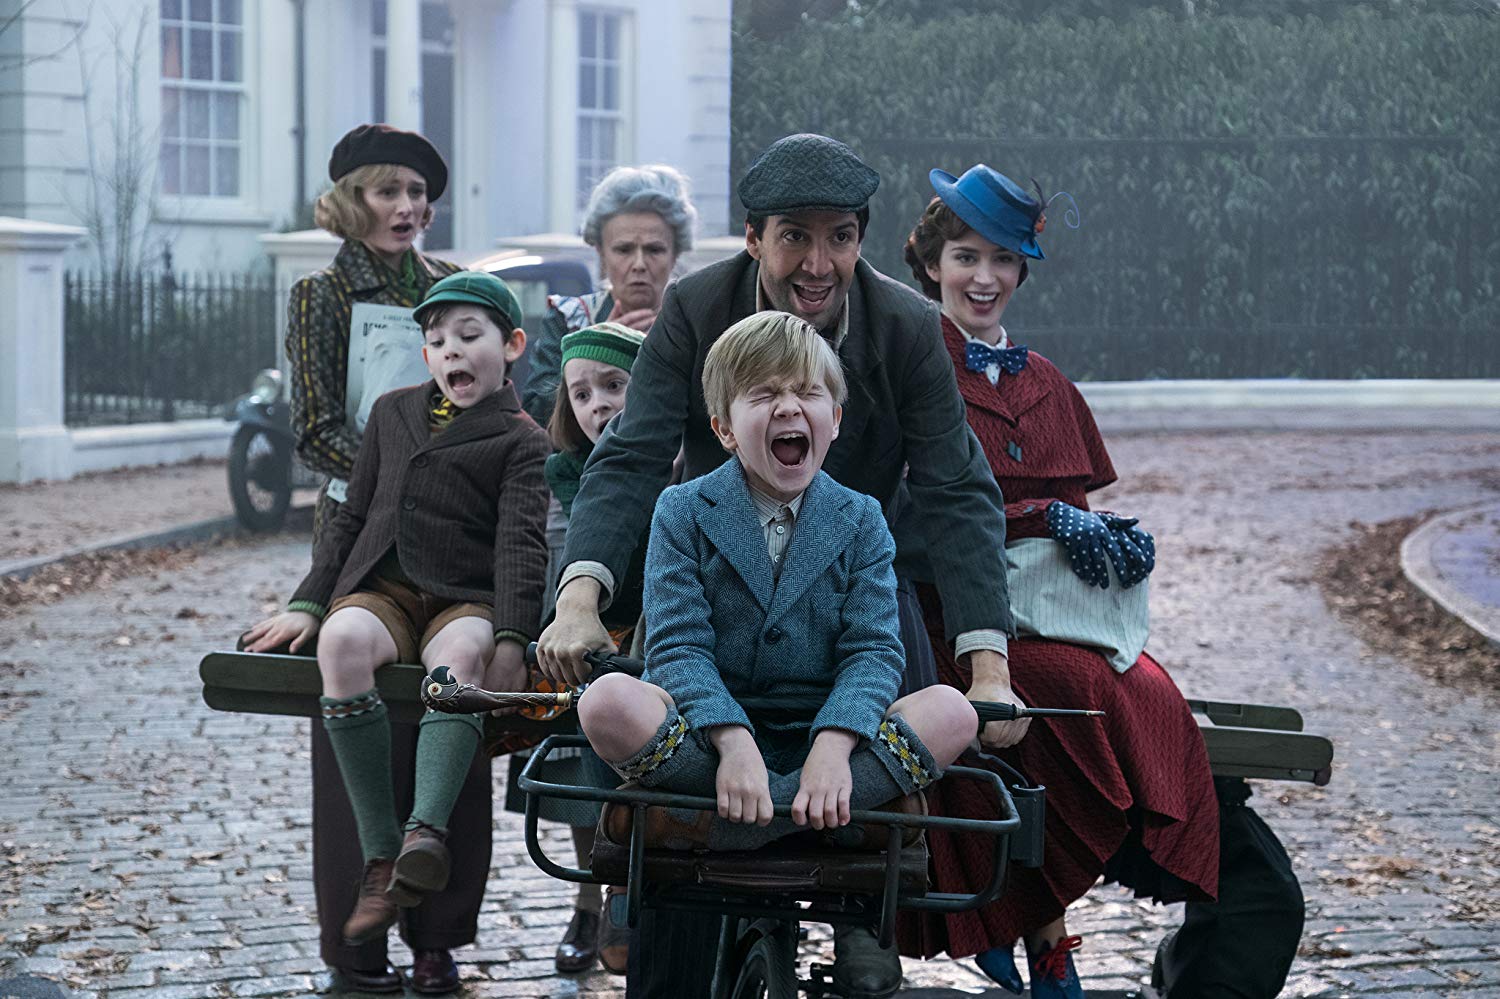 Movie still showing Mary Poppins and Co. riding a bicycle.